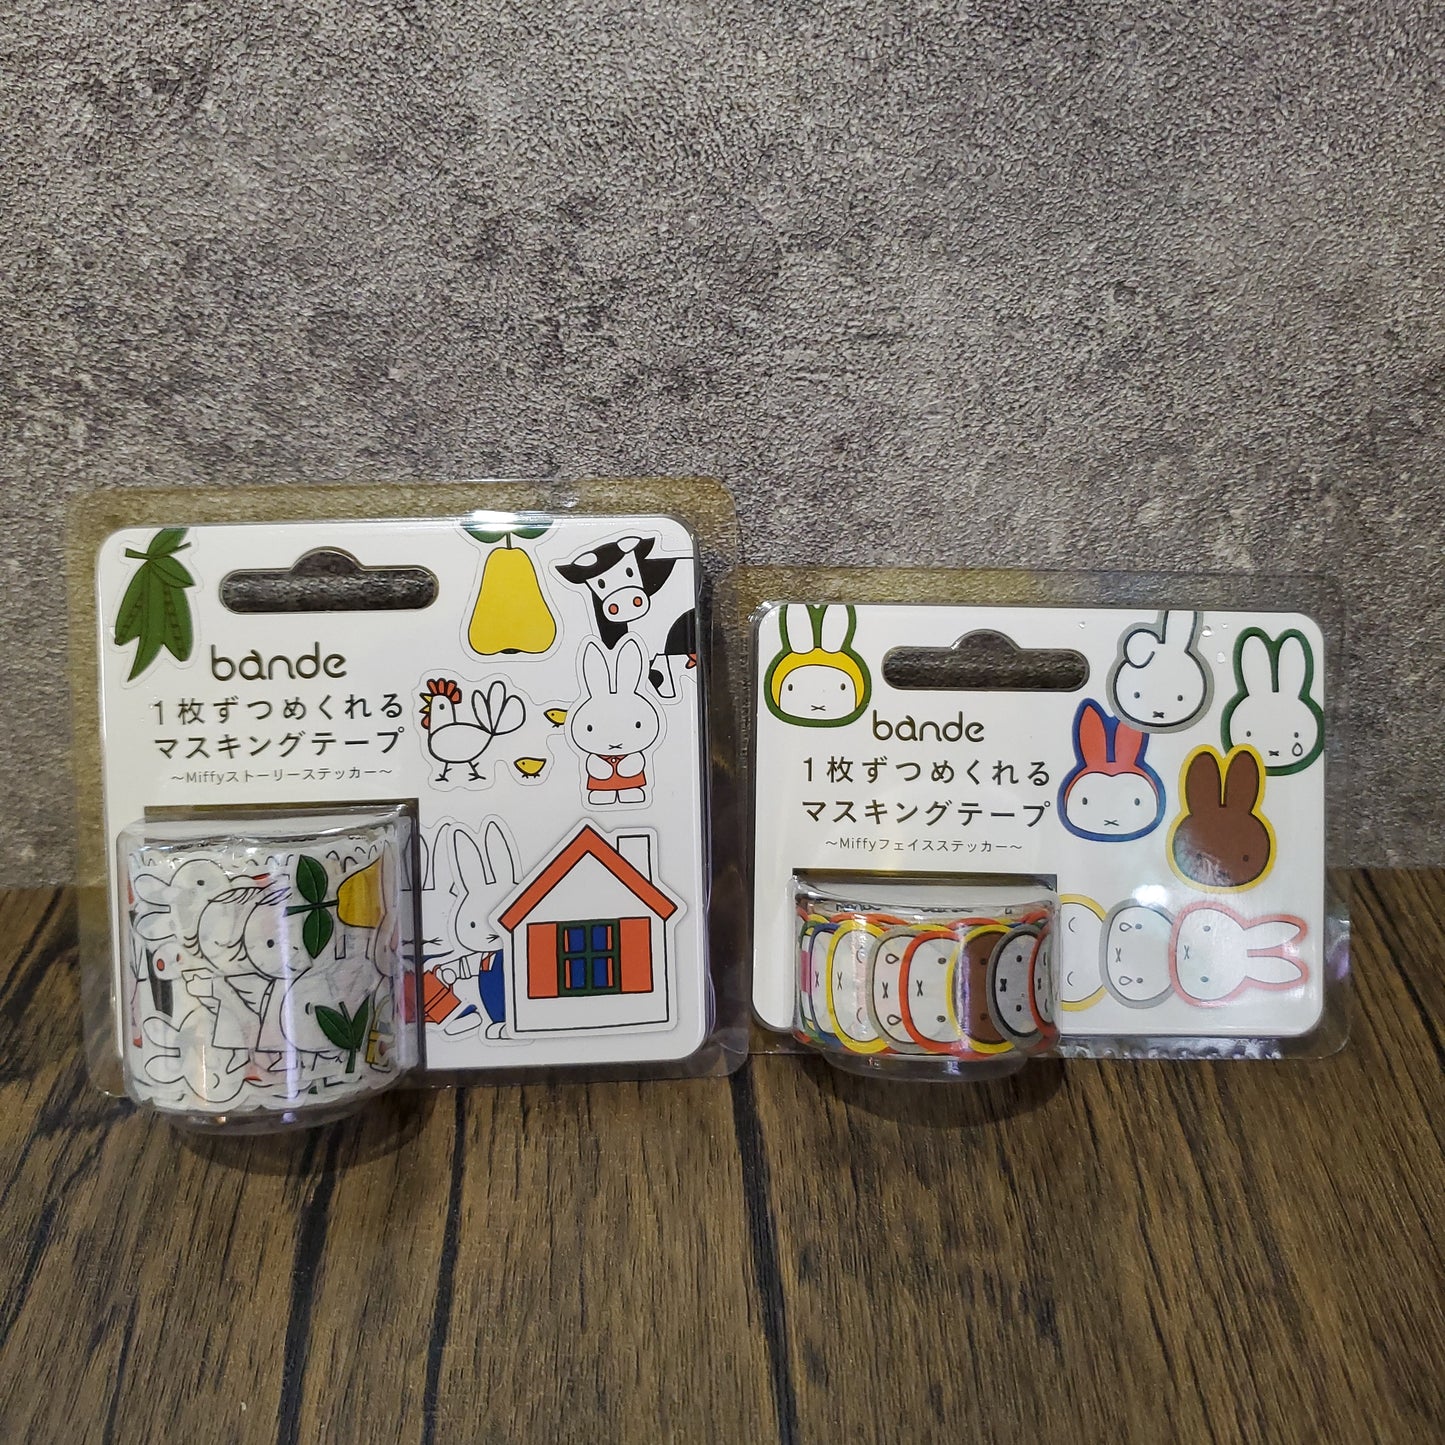 [NEW ARRIVAL] bande Miffy Story Stickers